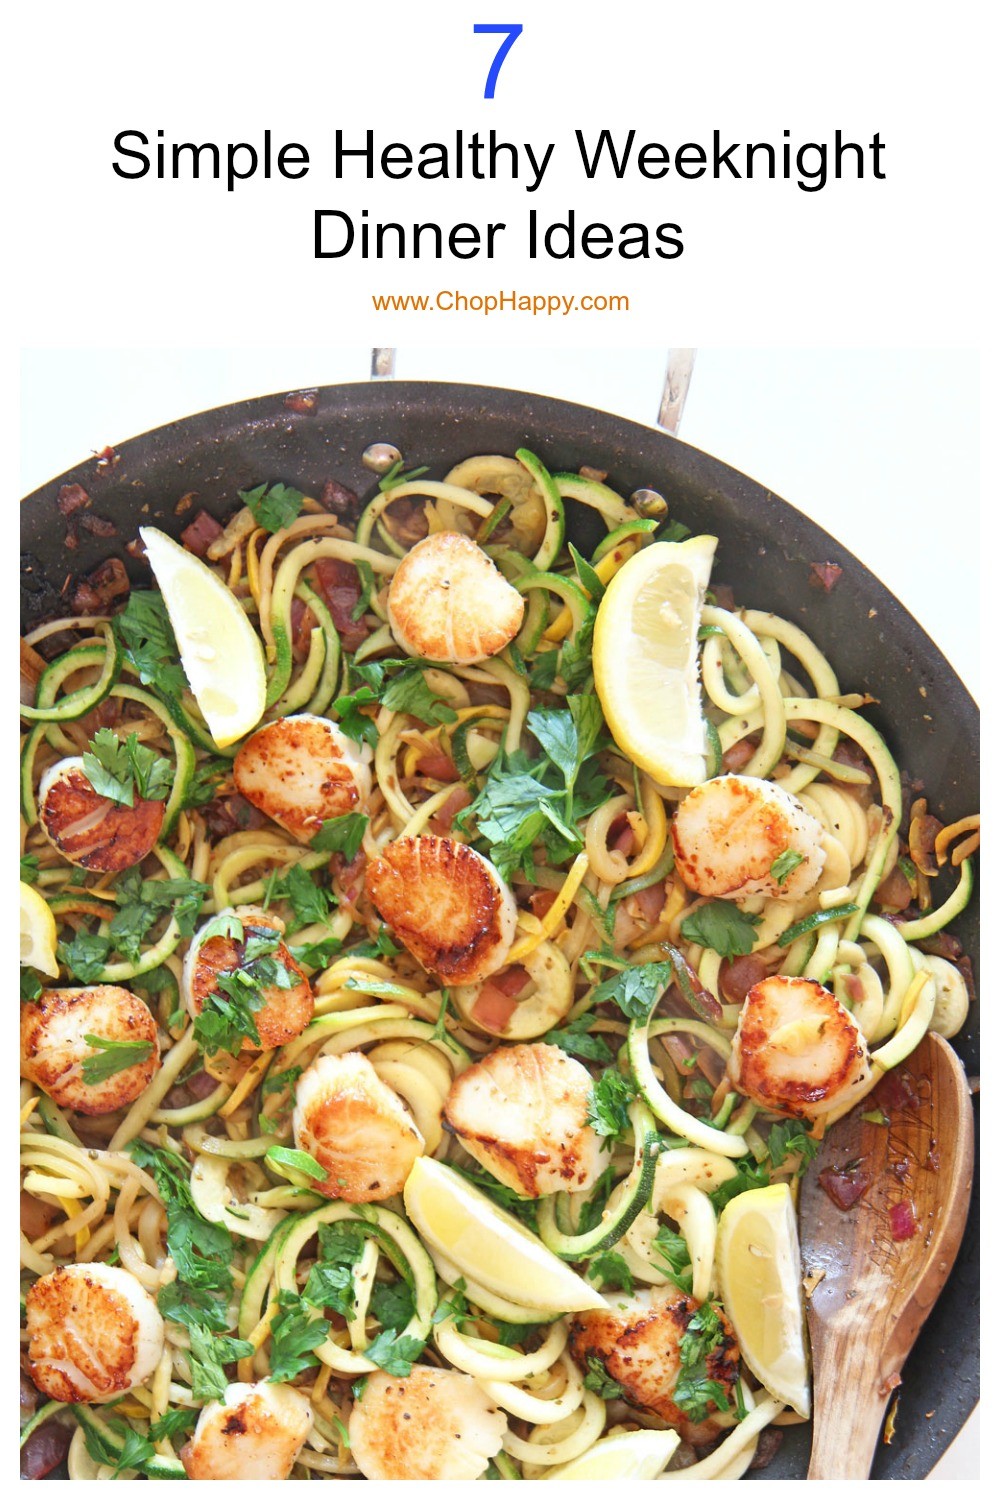 7 Healthy Dinner Recipe Ideas. Fast recipes for the busy weeknight dinner rush. The recipes include sheet pan recipes, zooodles, and Meatless Monday! Happy Cooking! www.ChopHappy.com #healthyrecipes #dinnerideas